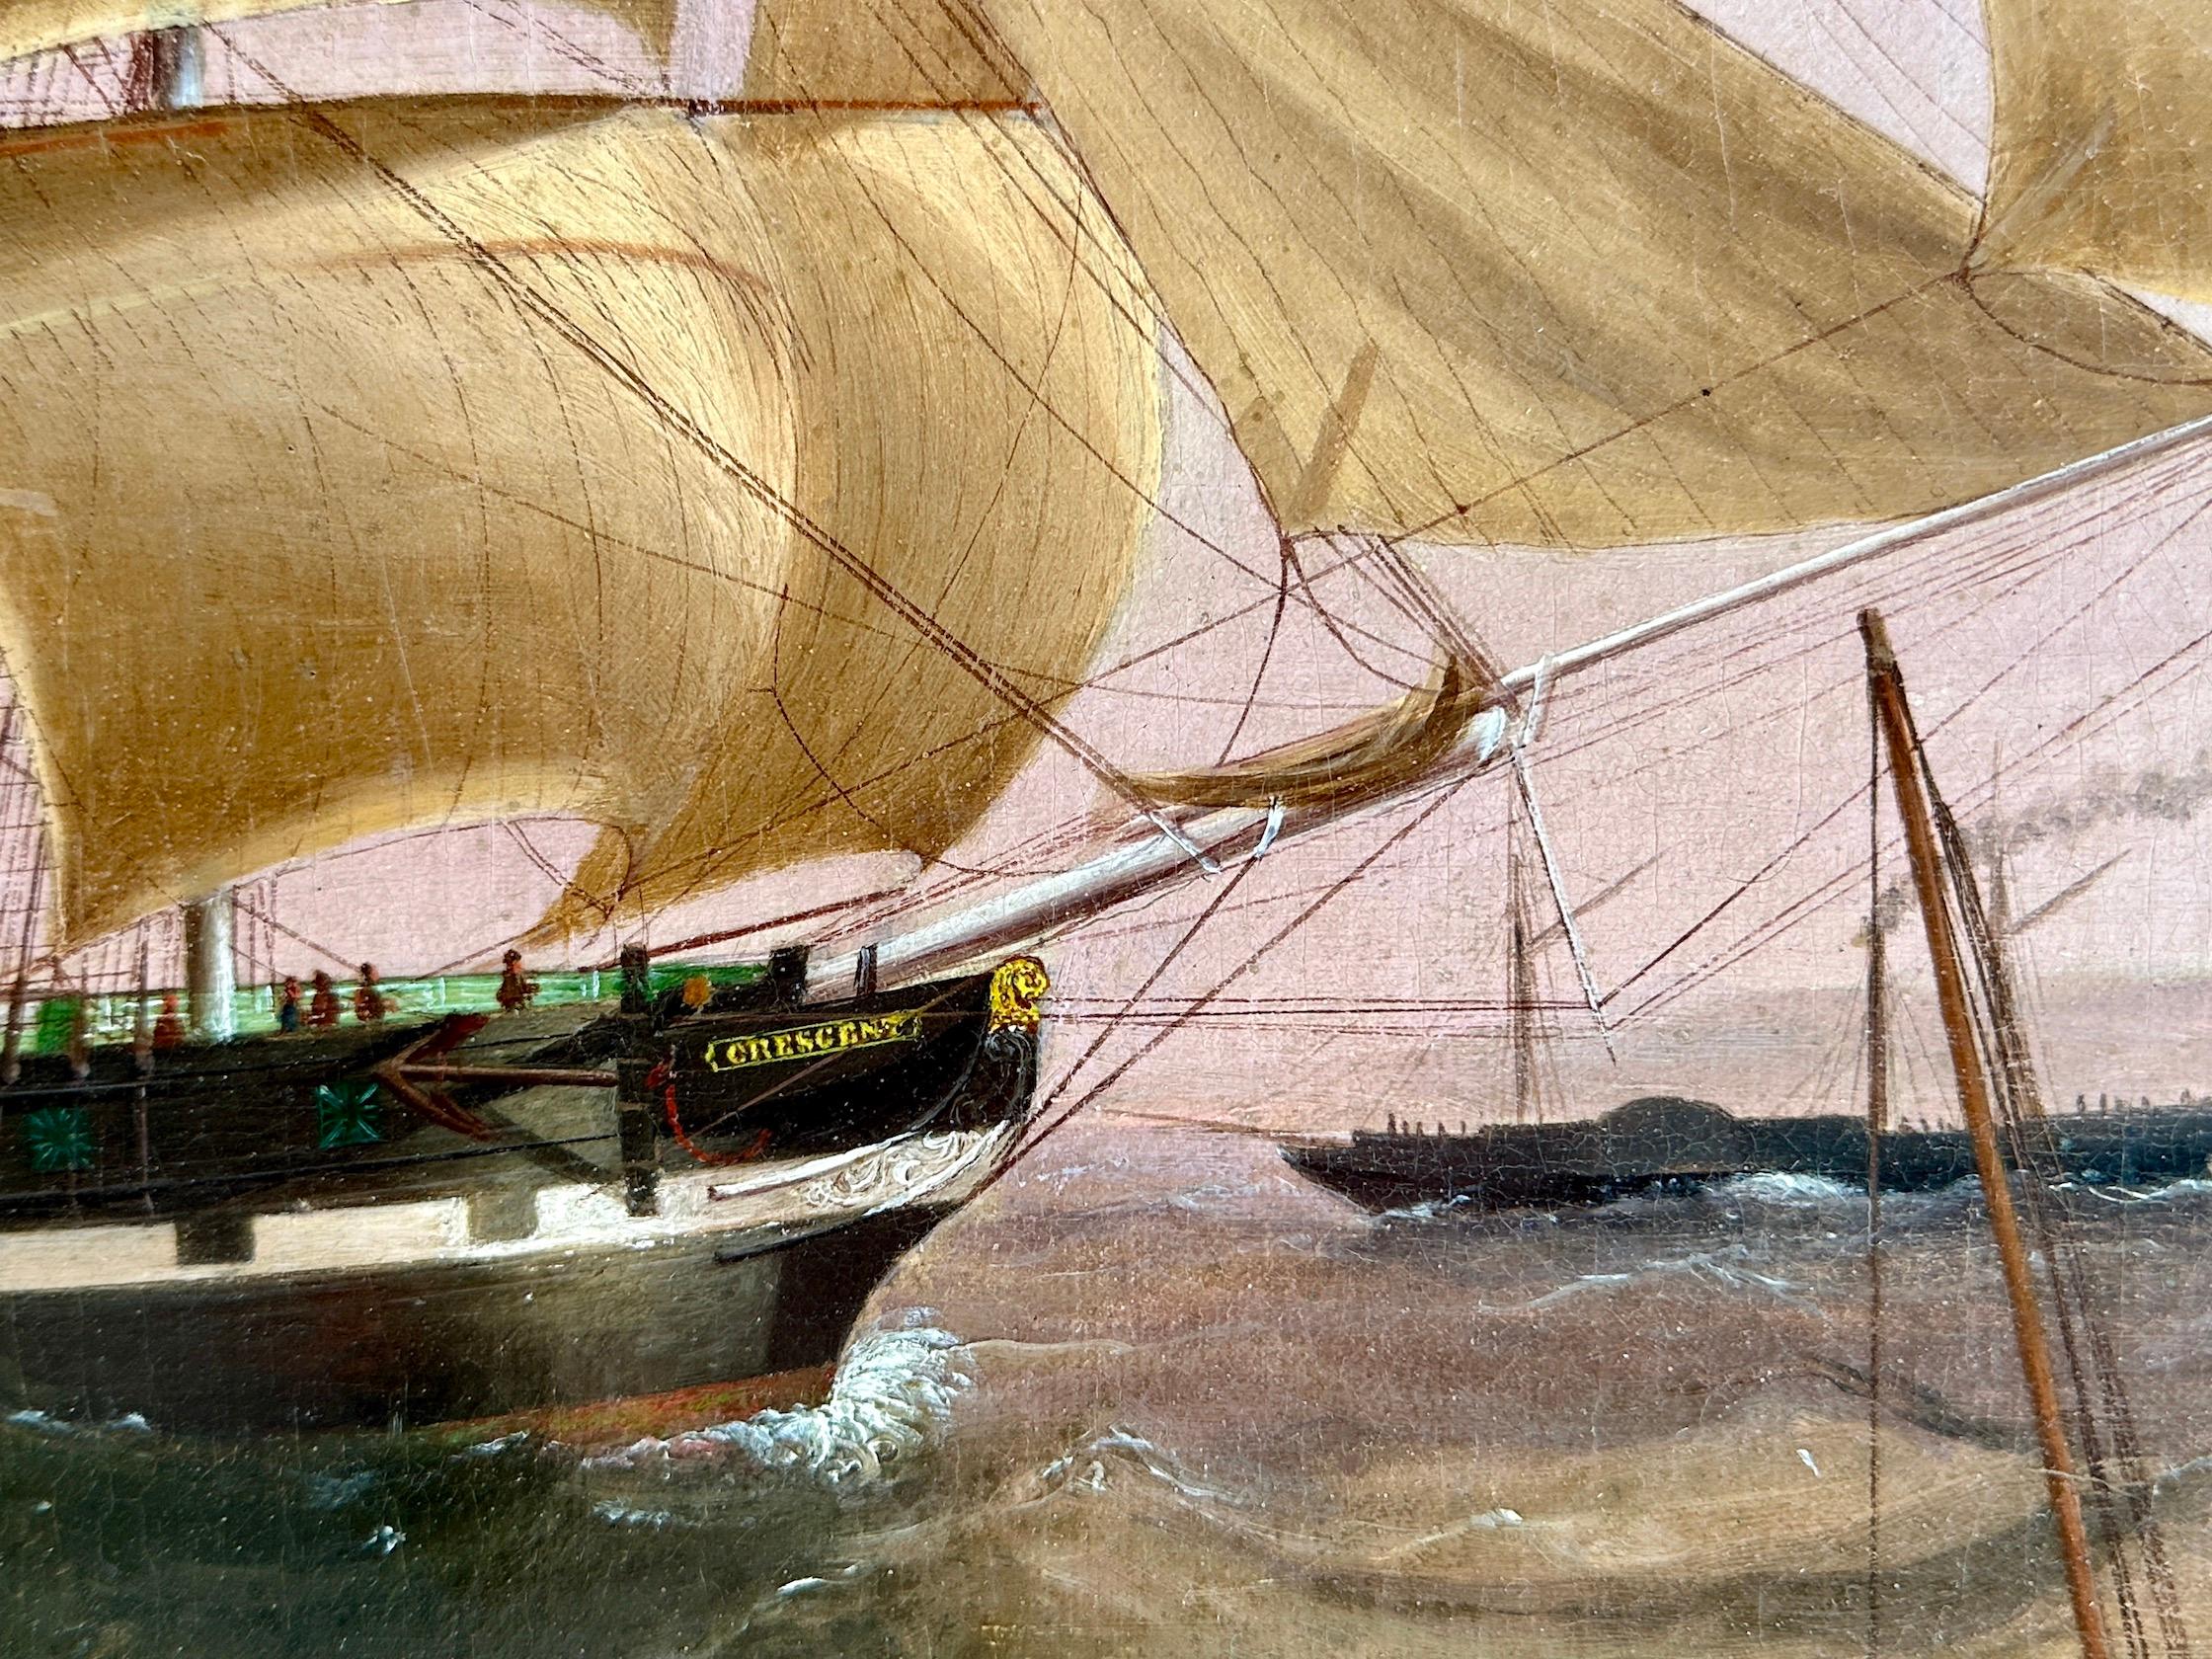 English 19th century portrait of the Clipper ship Crescent at sea in full sail For Sale 2